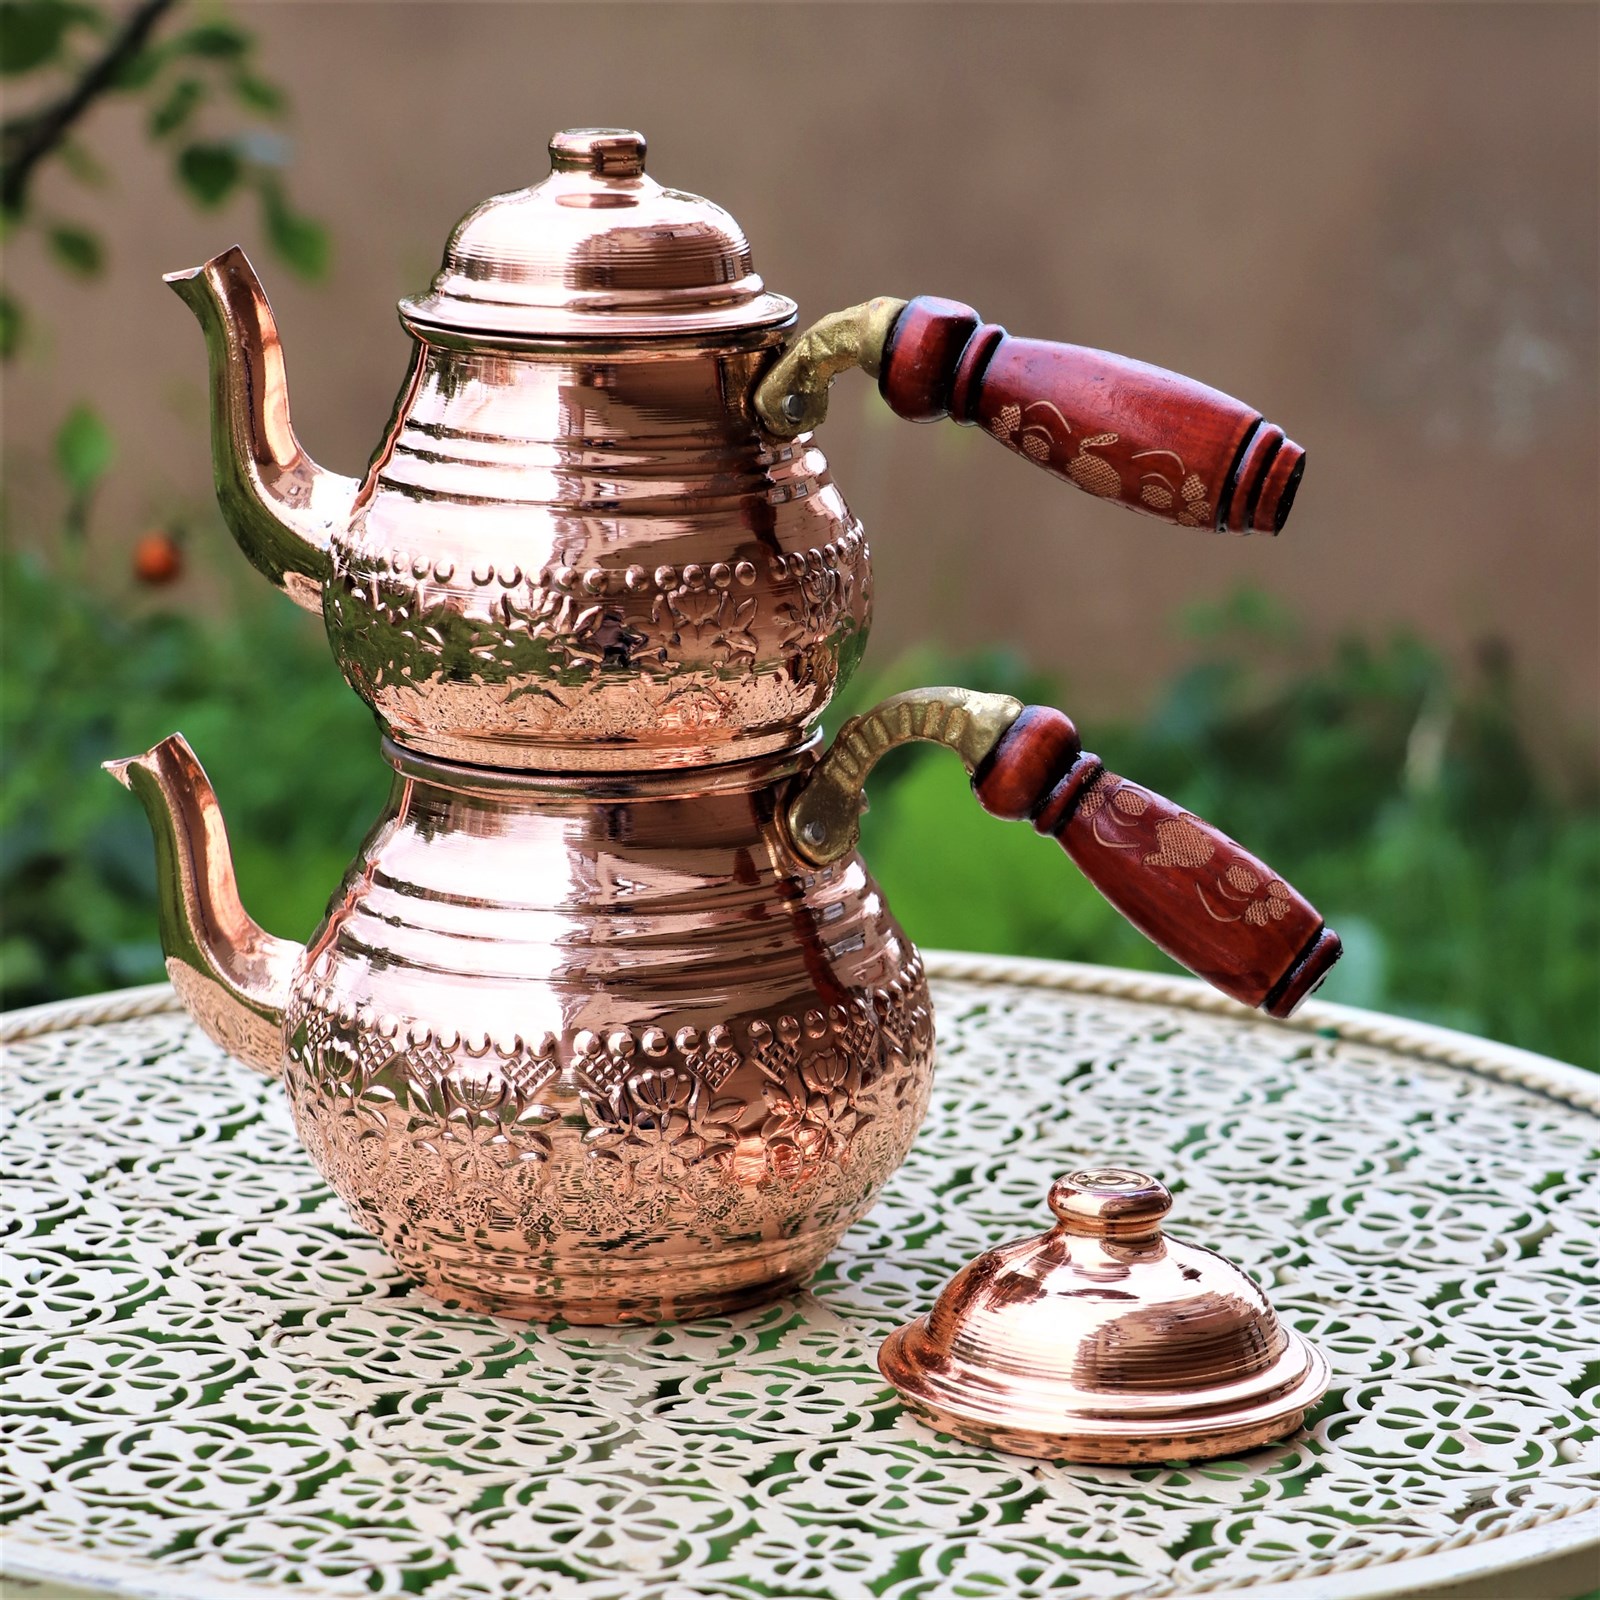 Handmade custom copper kitchenware from the manufacturer